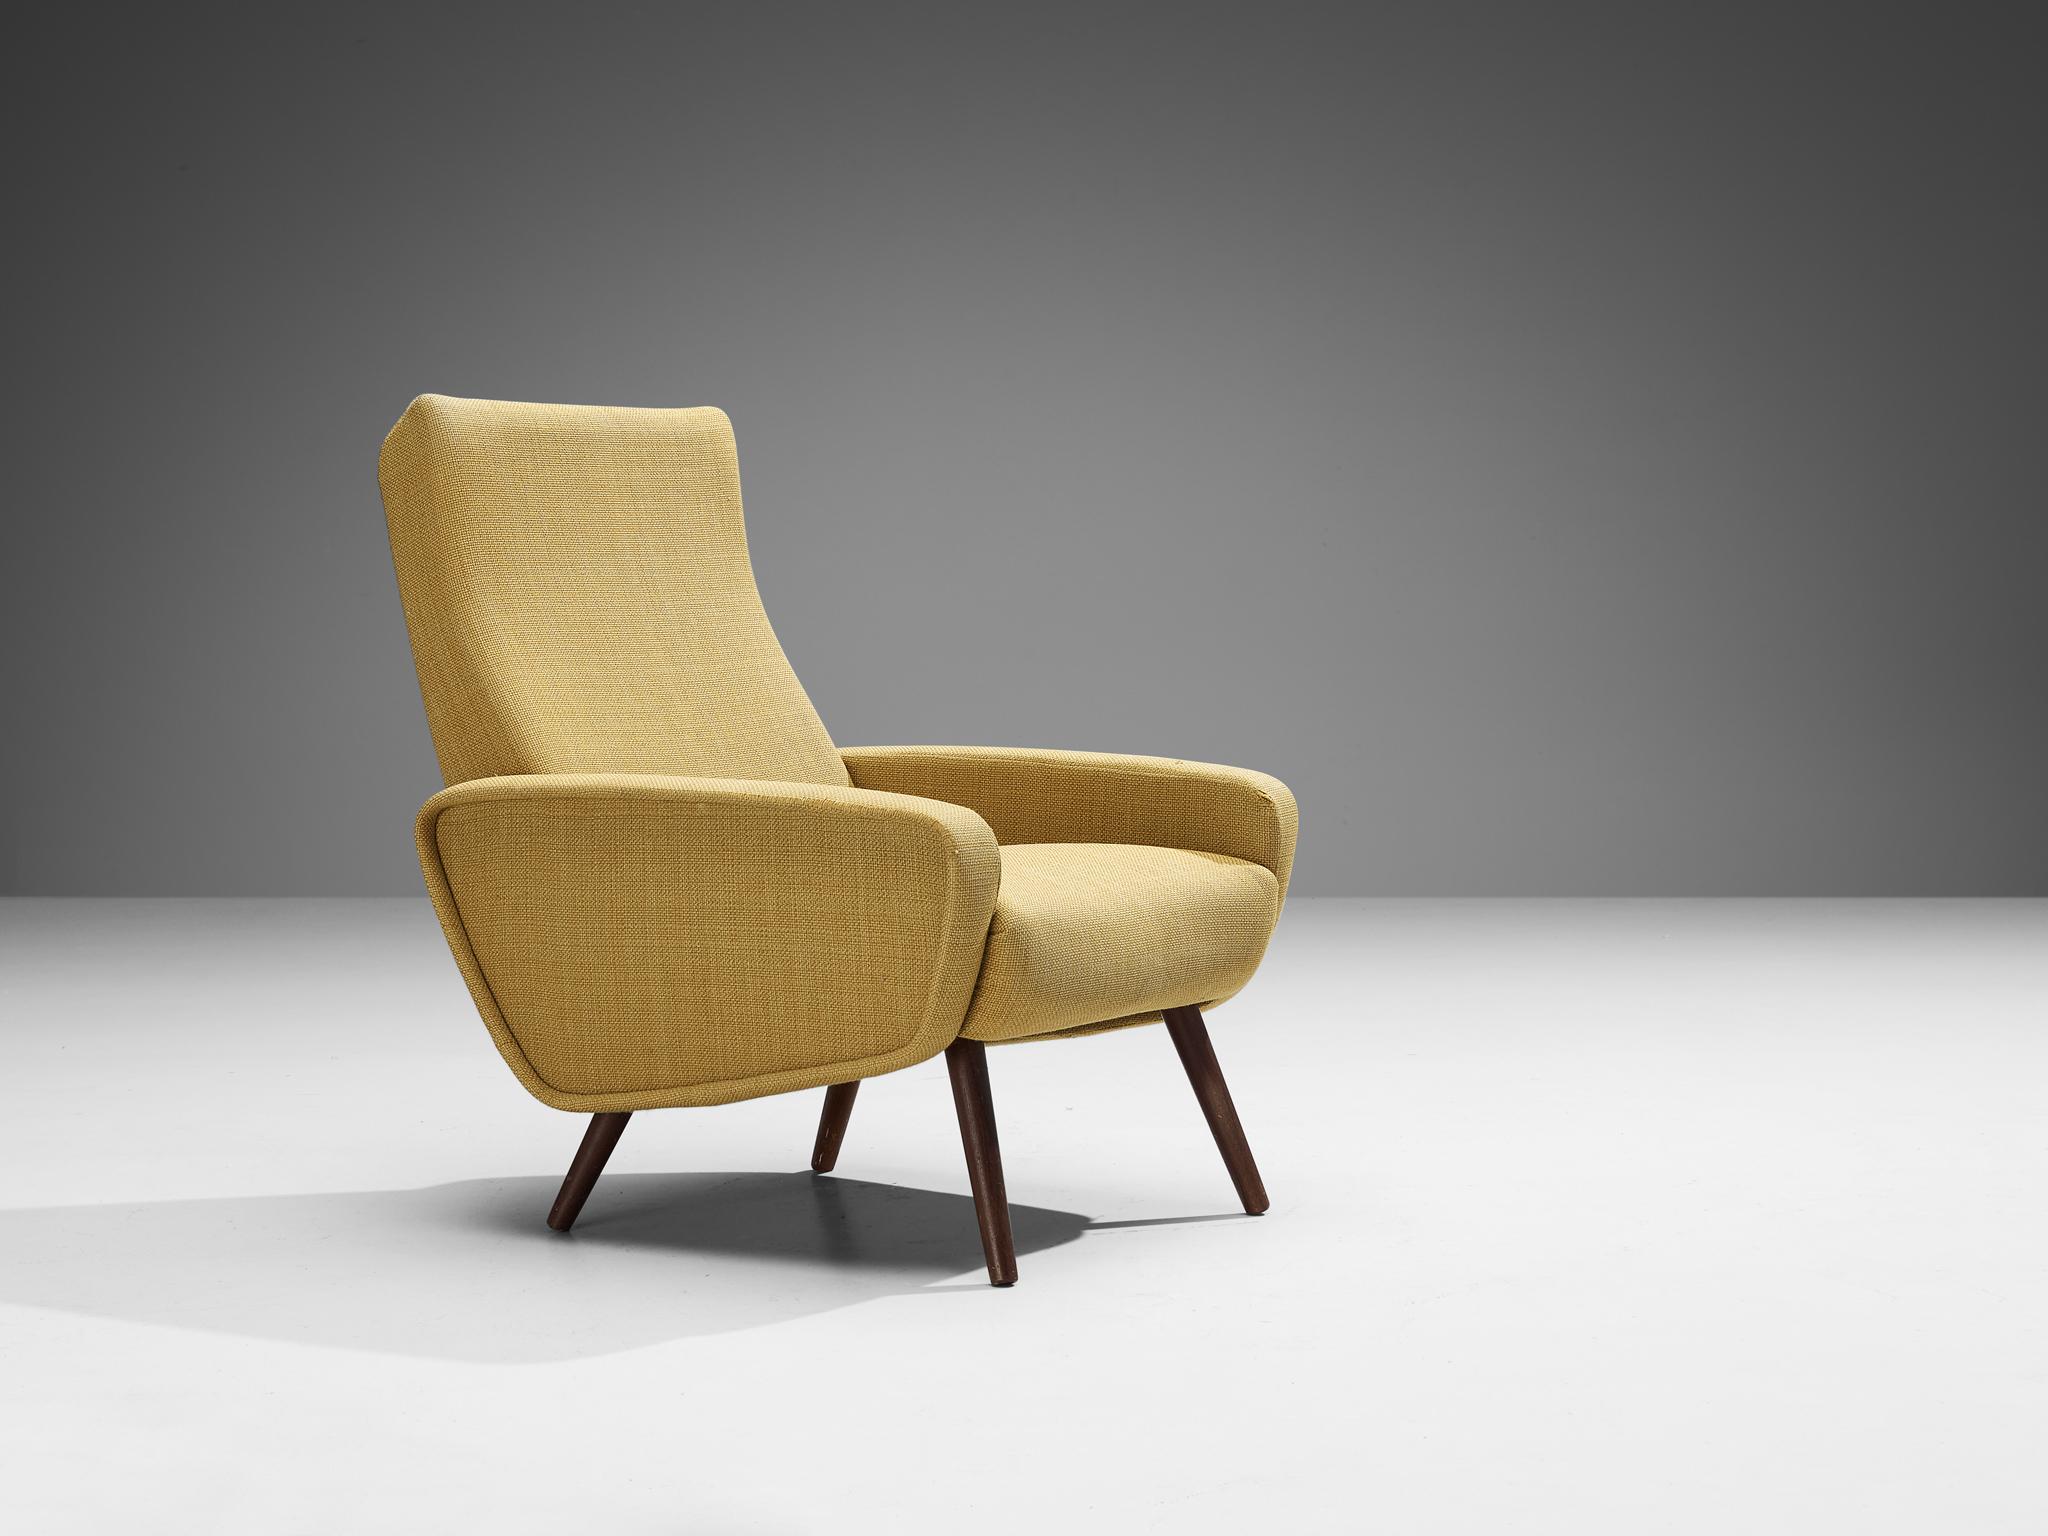 Easy chair, fabric, stained wood, Italy, 1960s

An extremely elegant and flattering armchair, made in Italy in the 1950s or 60s. This lounge chair with its round shaped armrests reminds of the work by Marco Zanuso. An ergonomic seating experience